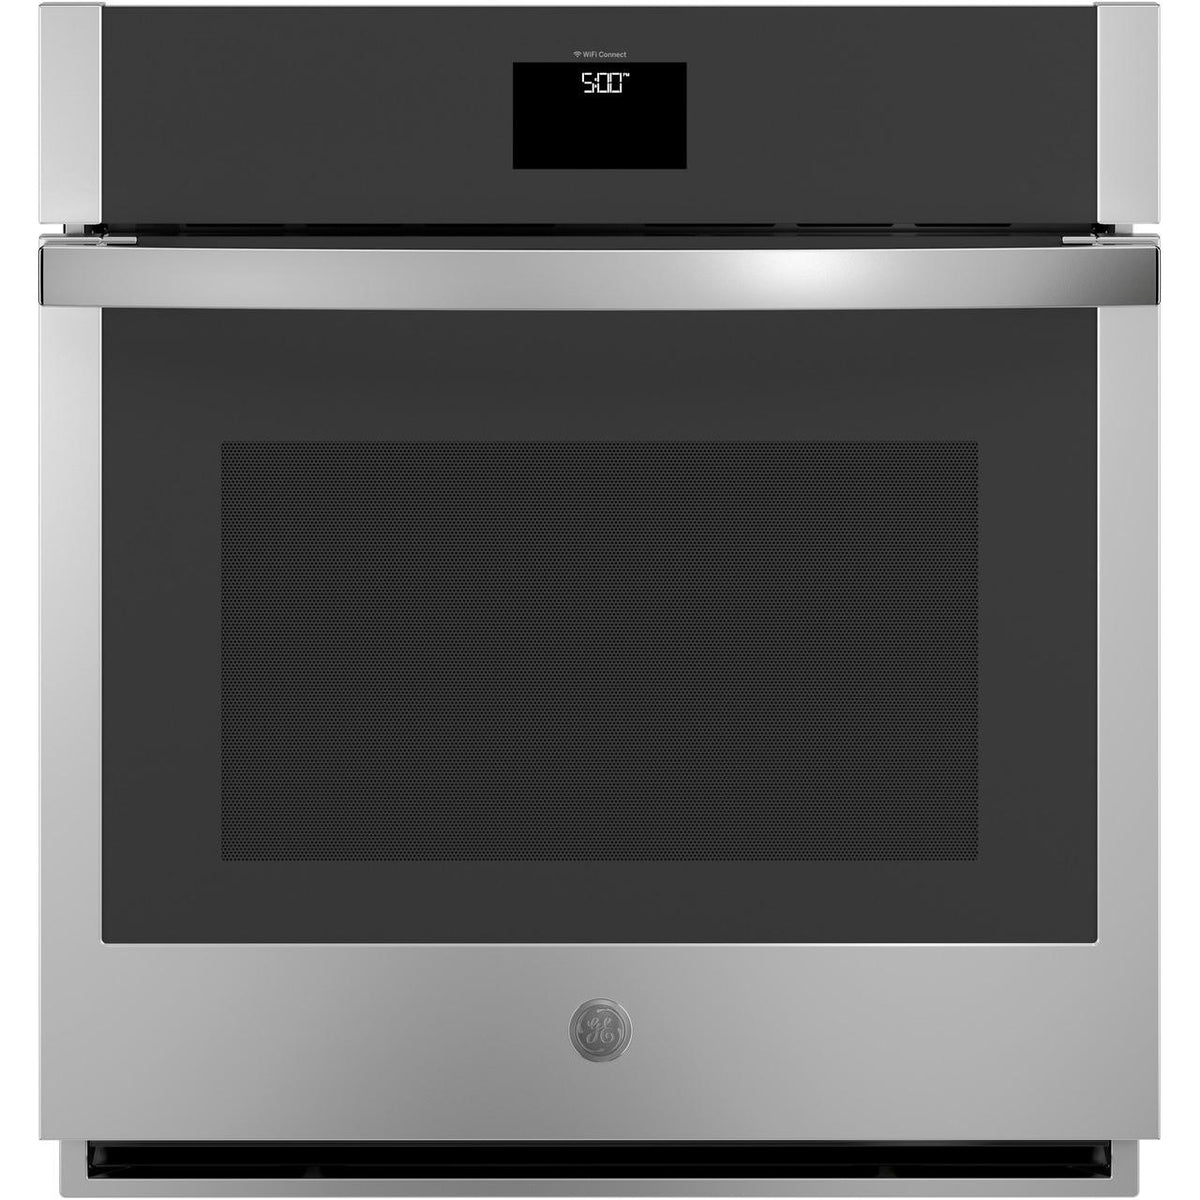 27-inch, 4.3 cu. ft. Built-in Single Wall Oven with True European Convection JKS5000SVSS IMAGE 1